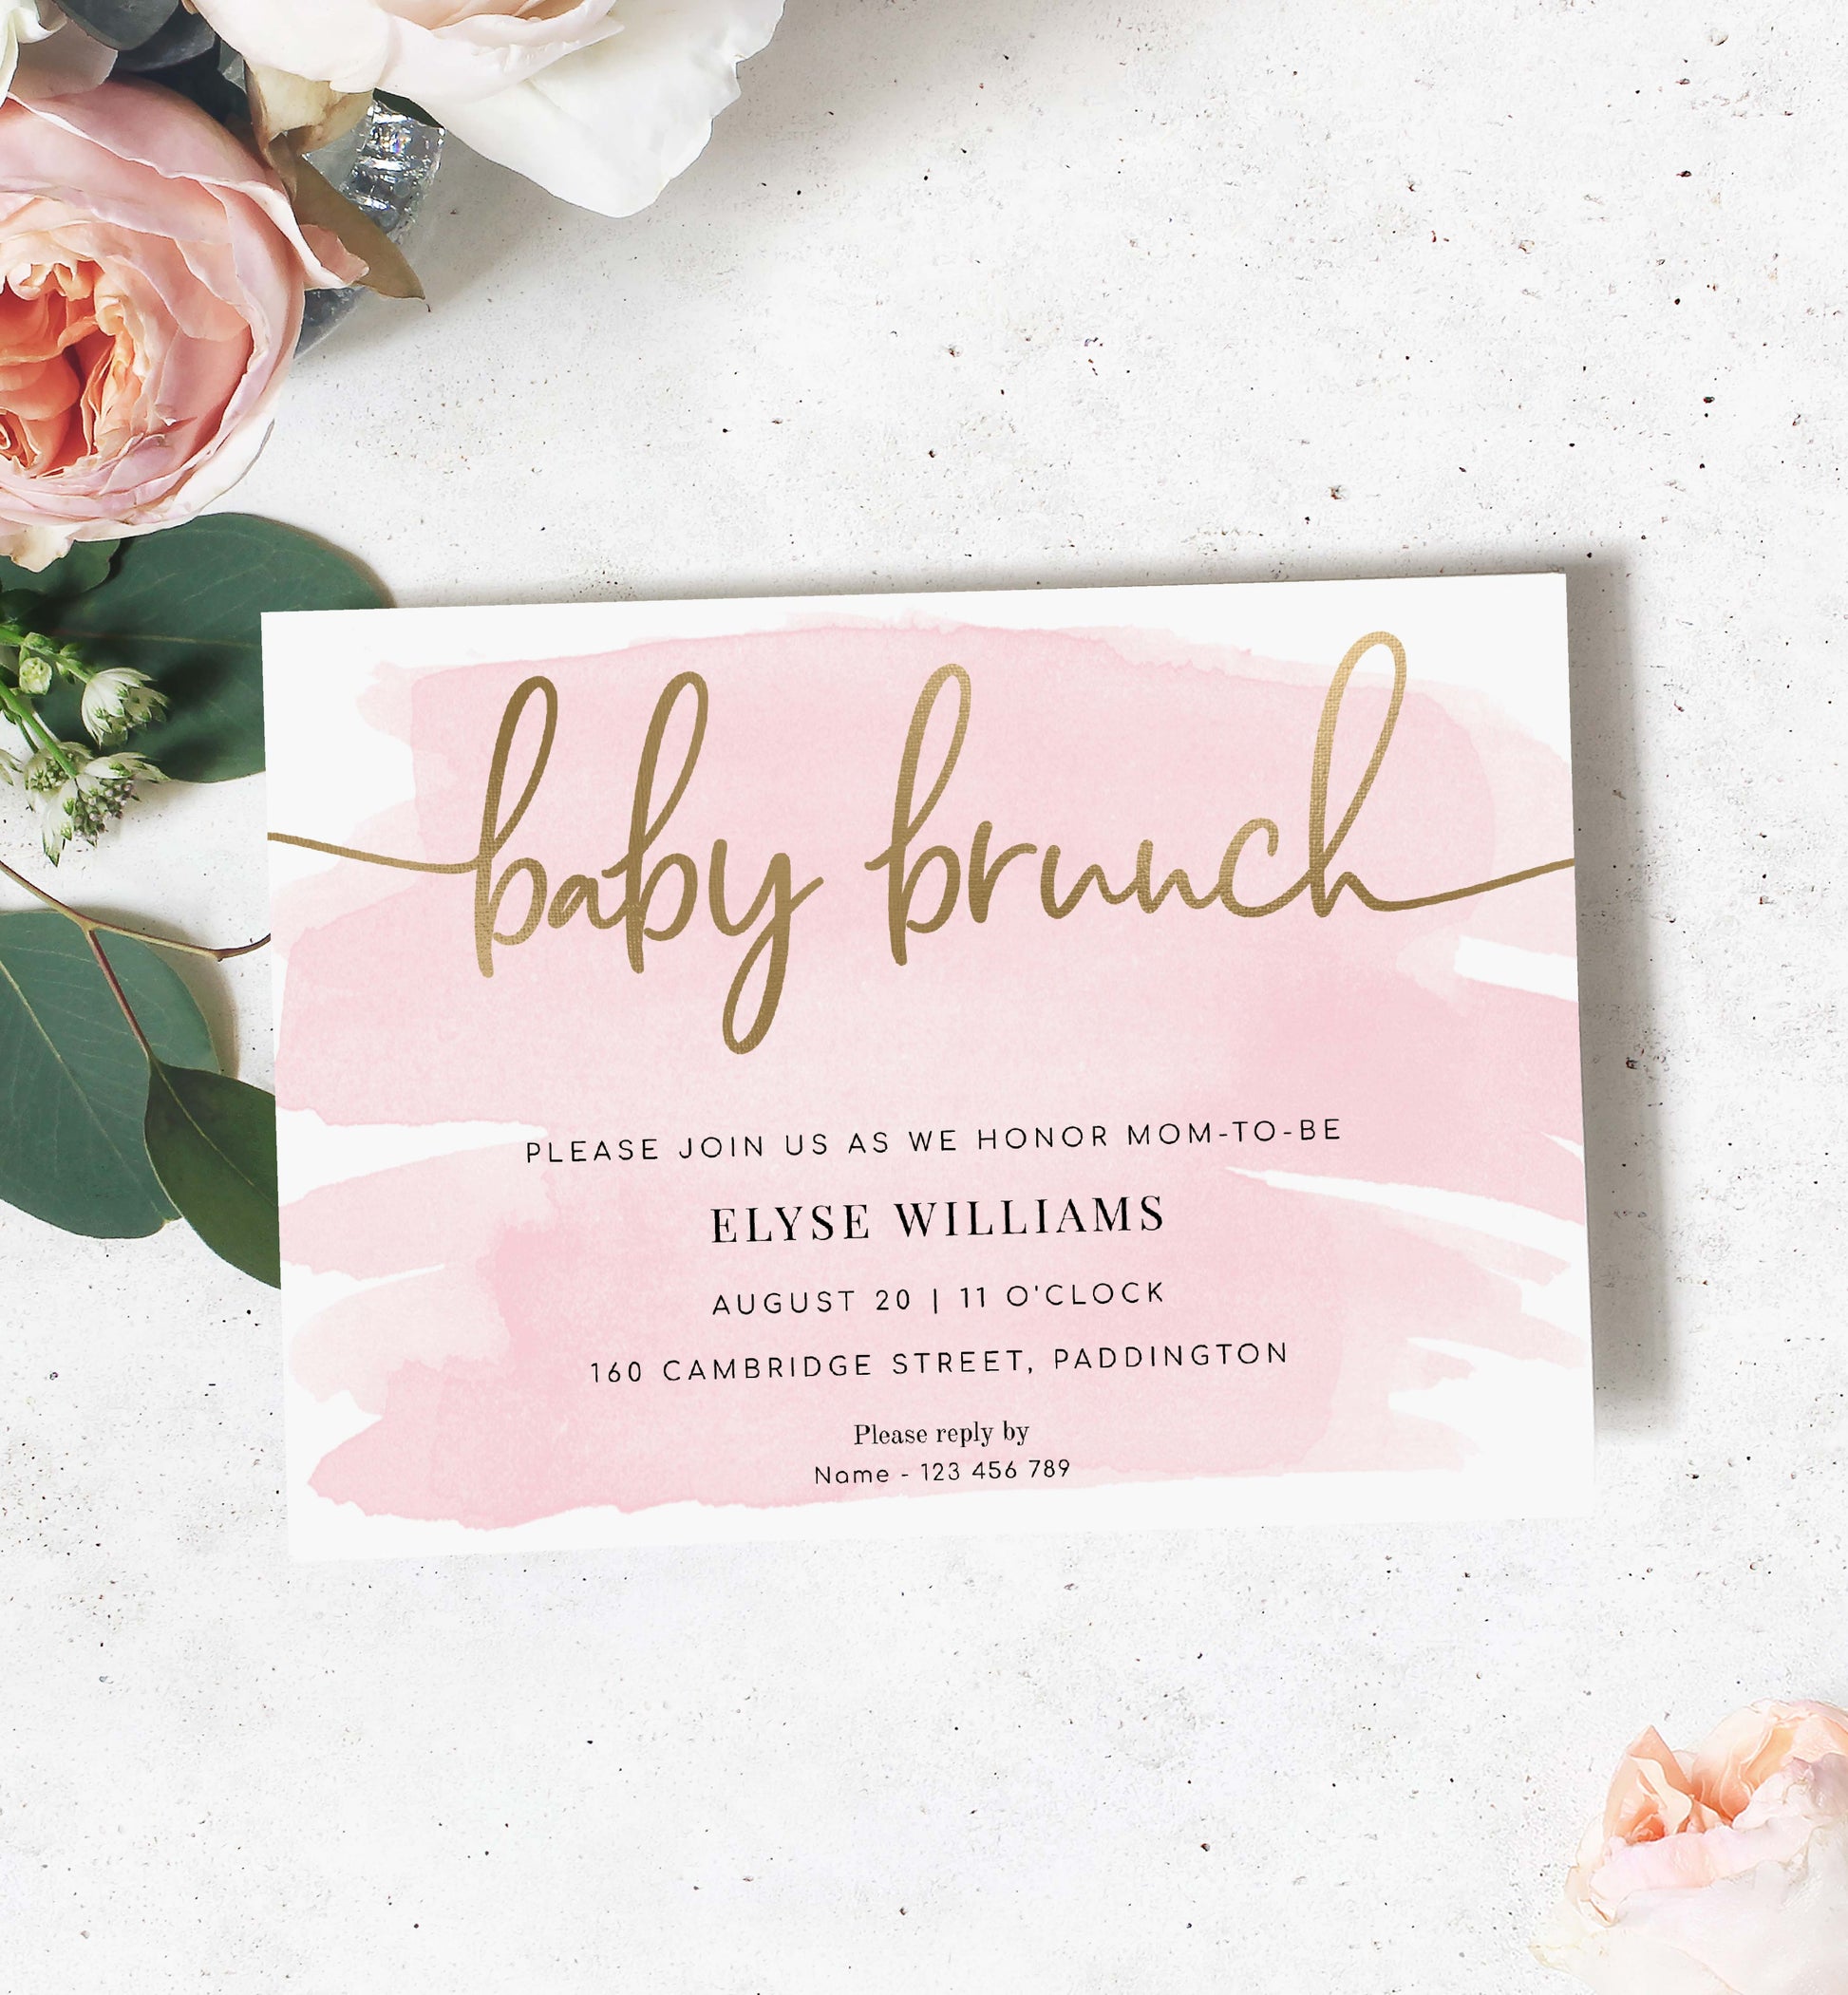 Printable Baby Brunch Invitation, Diaper Raffle, Book Request, Books For Baby, Pink Watercolour, Baby Shower Invite, Girl Baby Shower Evite